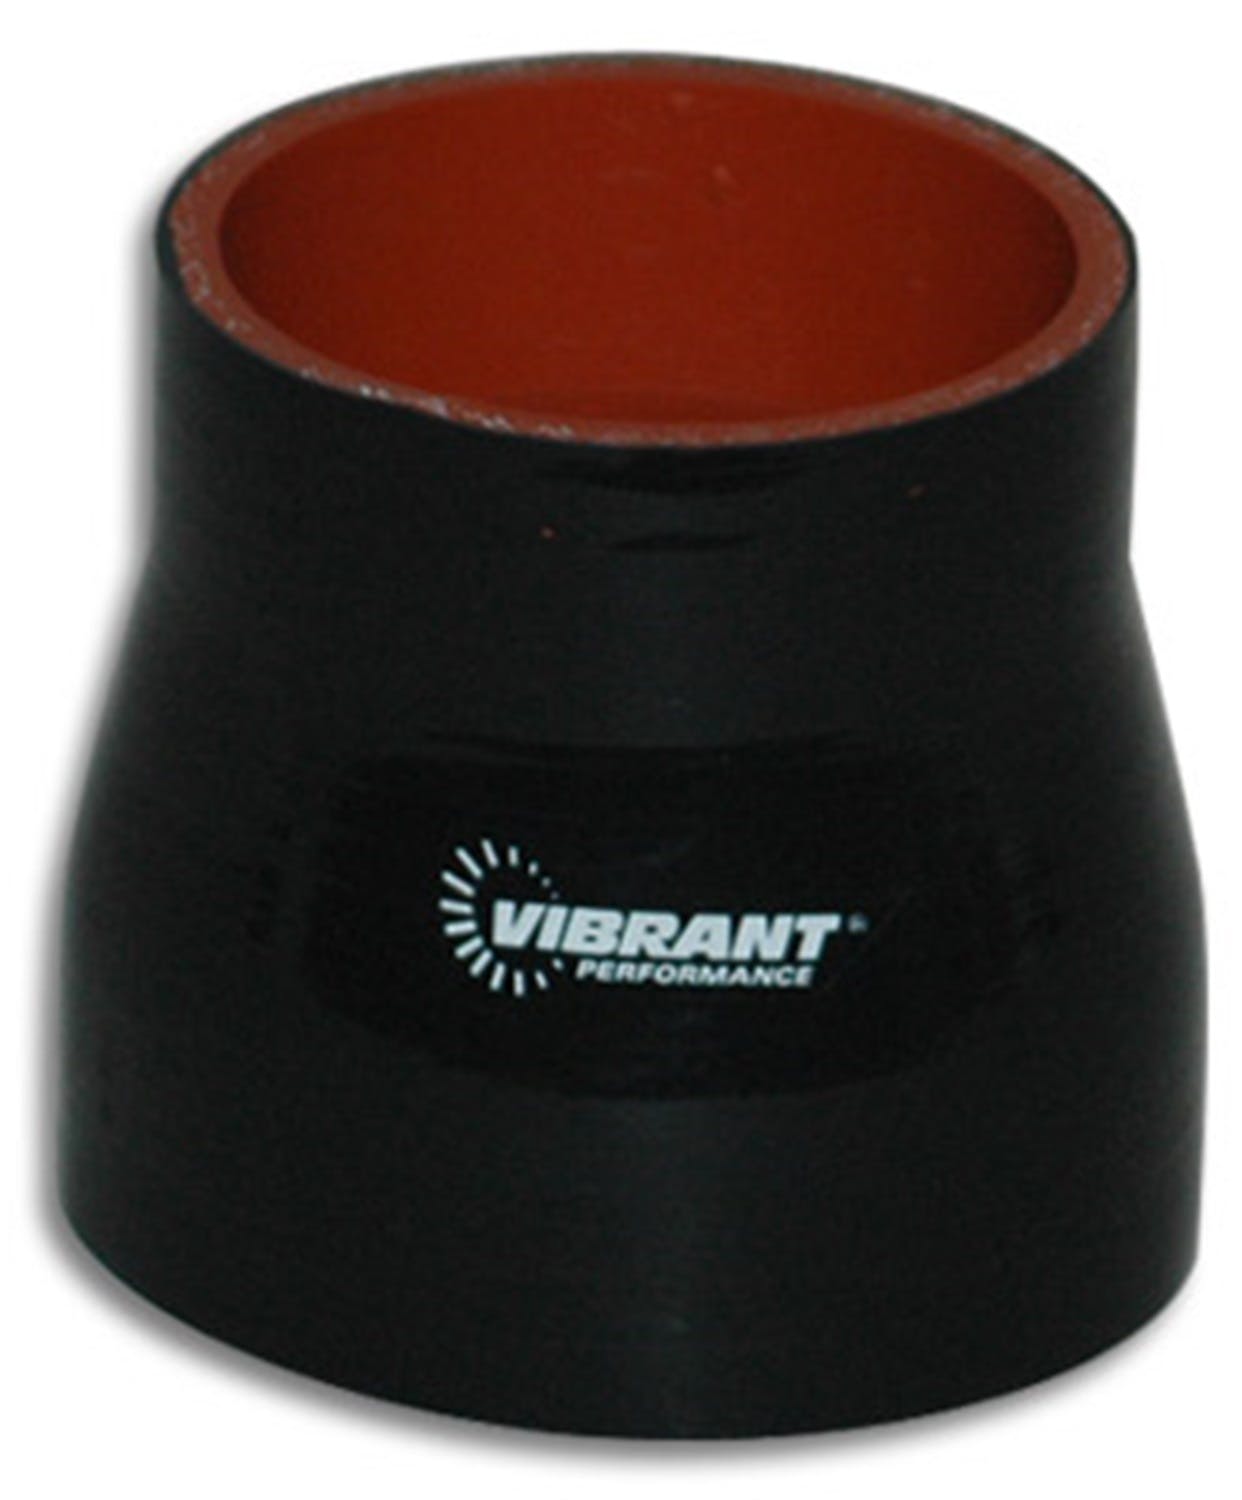 Vibrant Performance 2834 4 Ply Reducer Coupling, 2.75 inch x 3.25 inch x 3 inch Long - Black